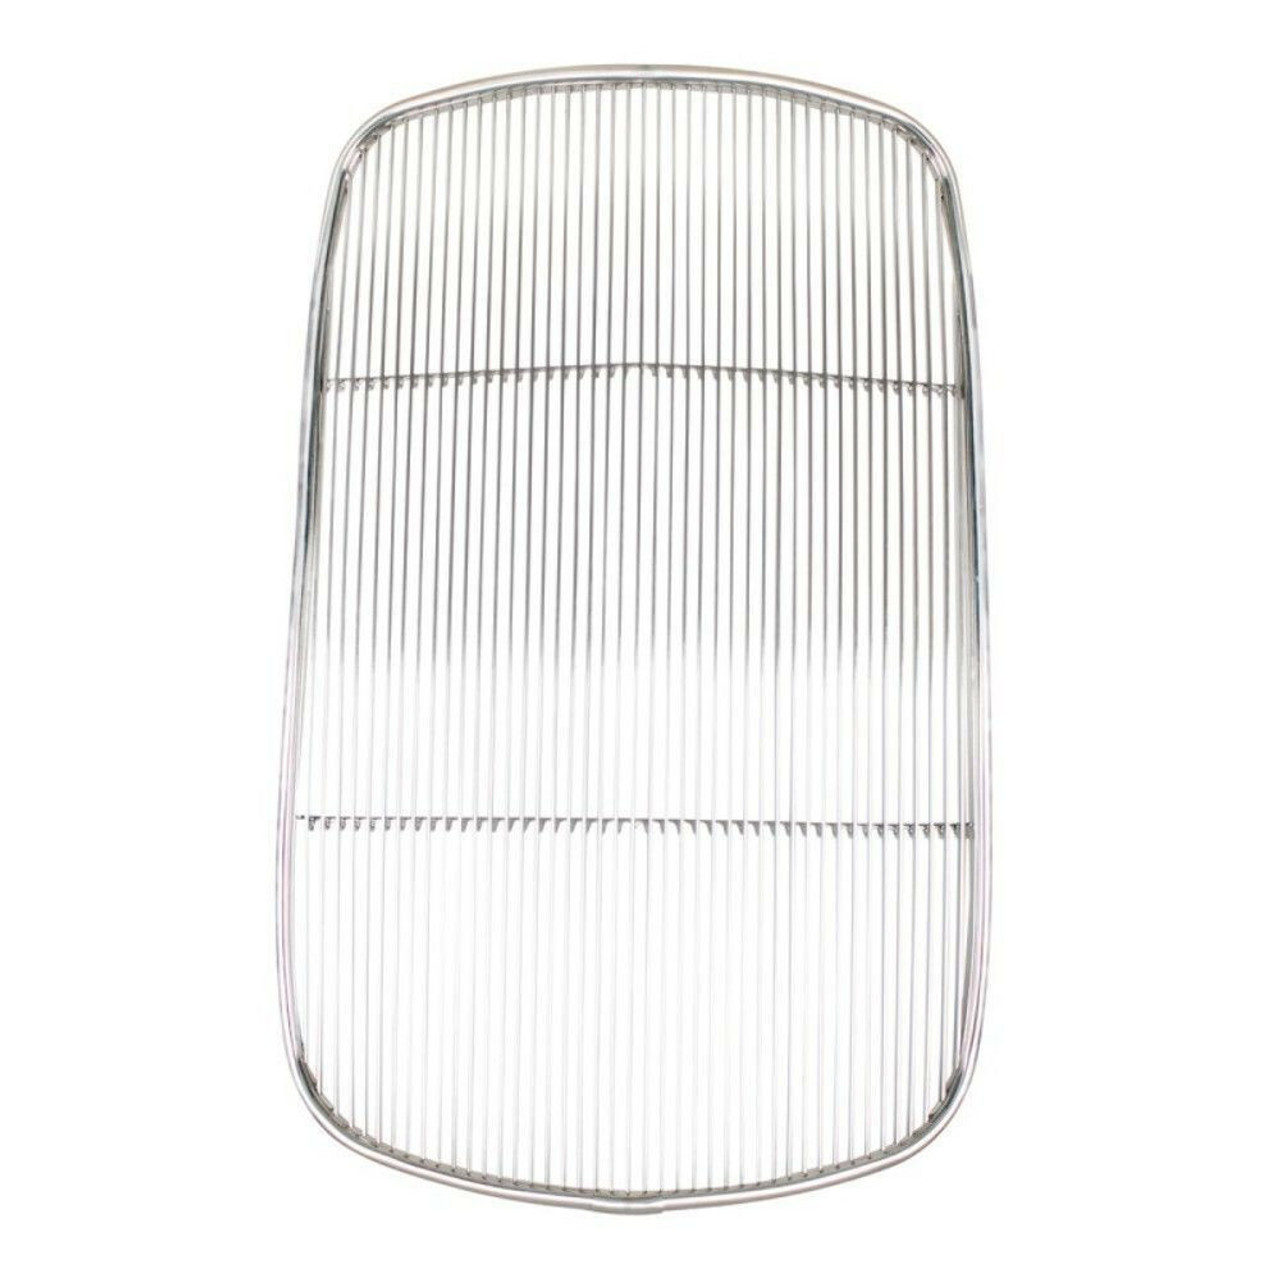 Origianl Style Stainless Steel Grille Insert For 1932 Ford Passenger Car - Without Crank Hole